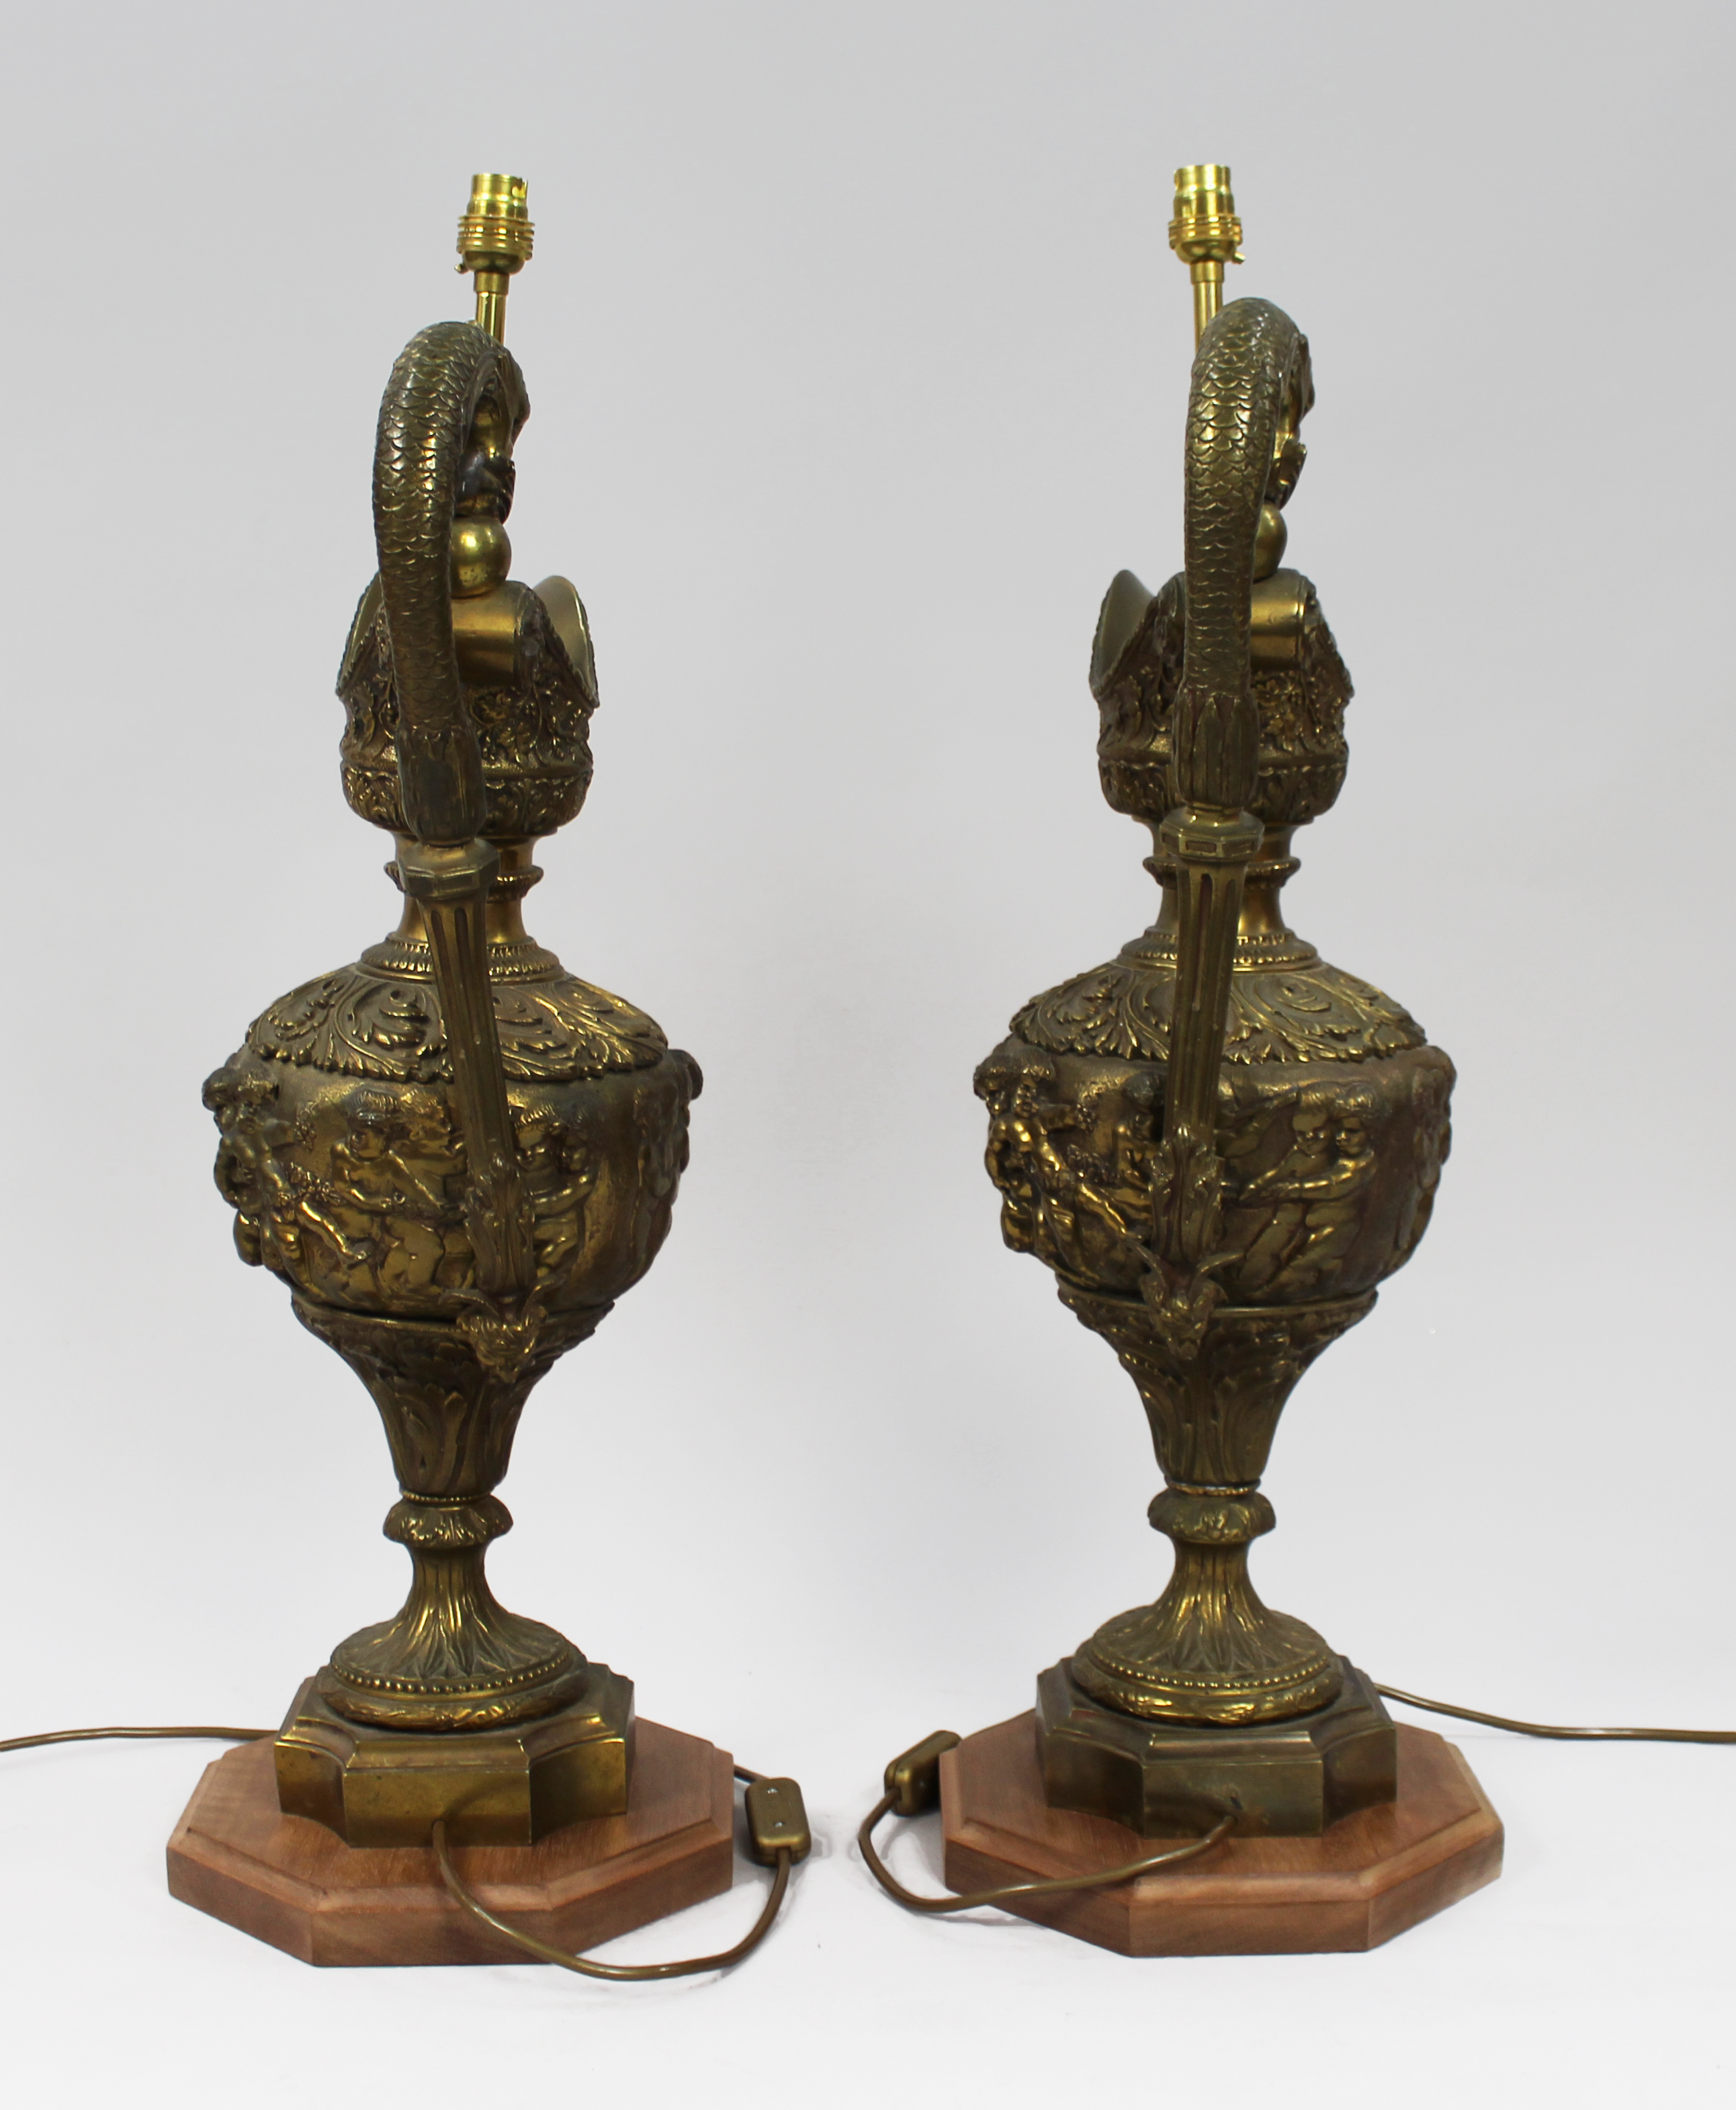 Pair of Large 19th c. Brass Ewer Table Lamps - Image 4 of 8